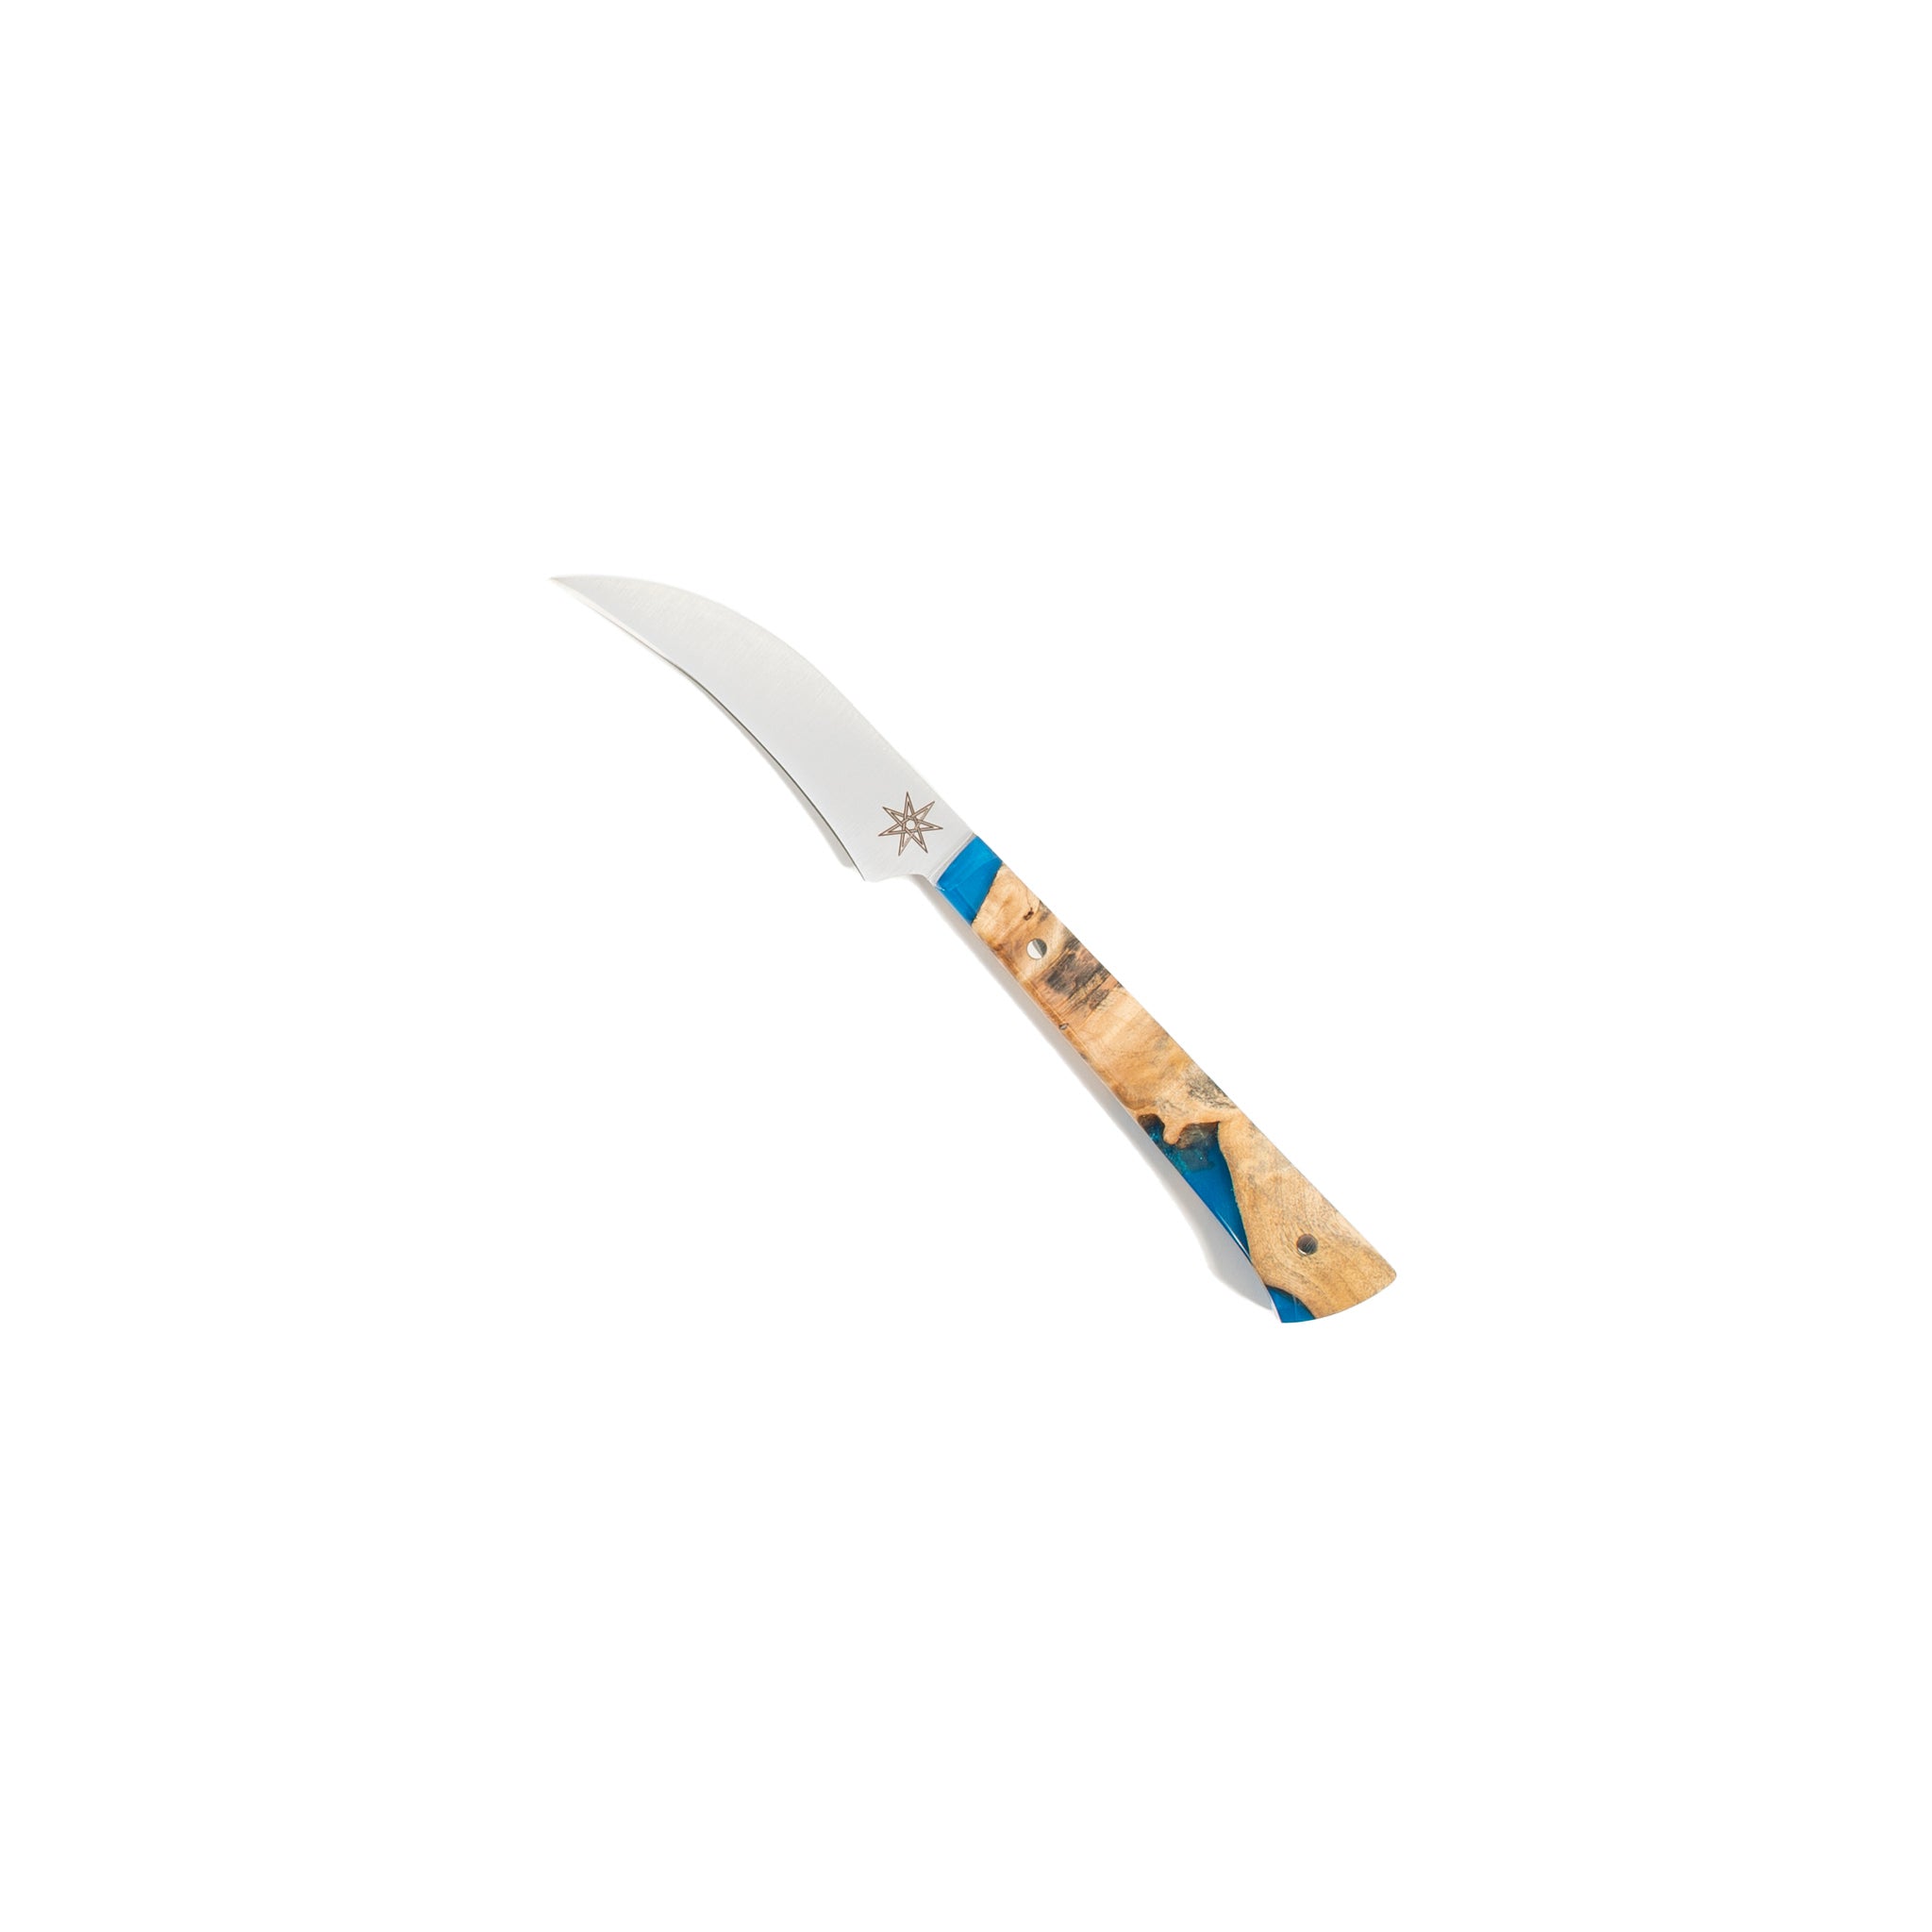 Town Cutler Tahoe Bliss Bird's Beak Knife. Curved stainless steel blade with blue and buckeye burl handle.